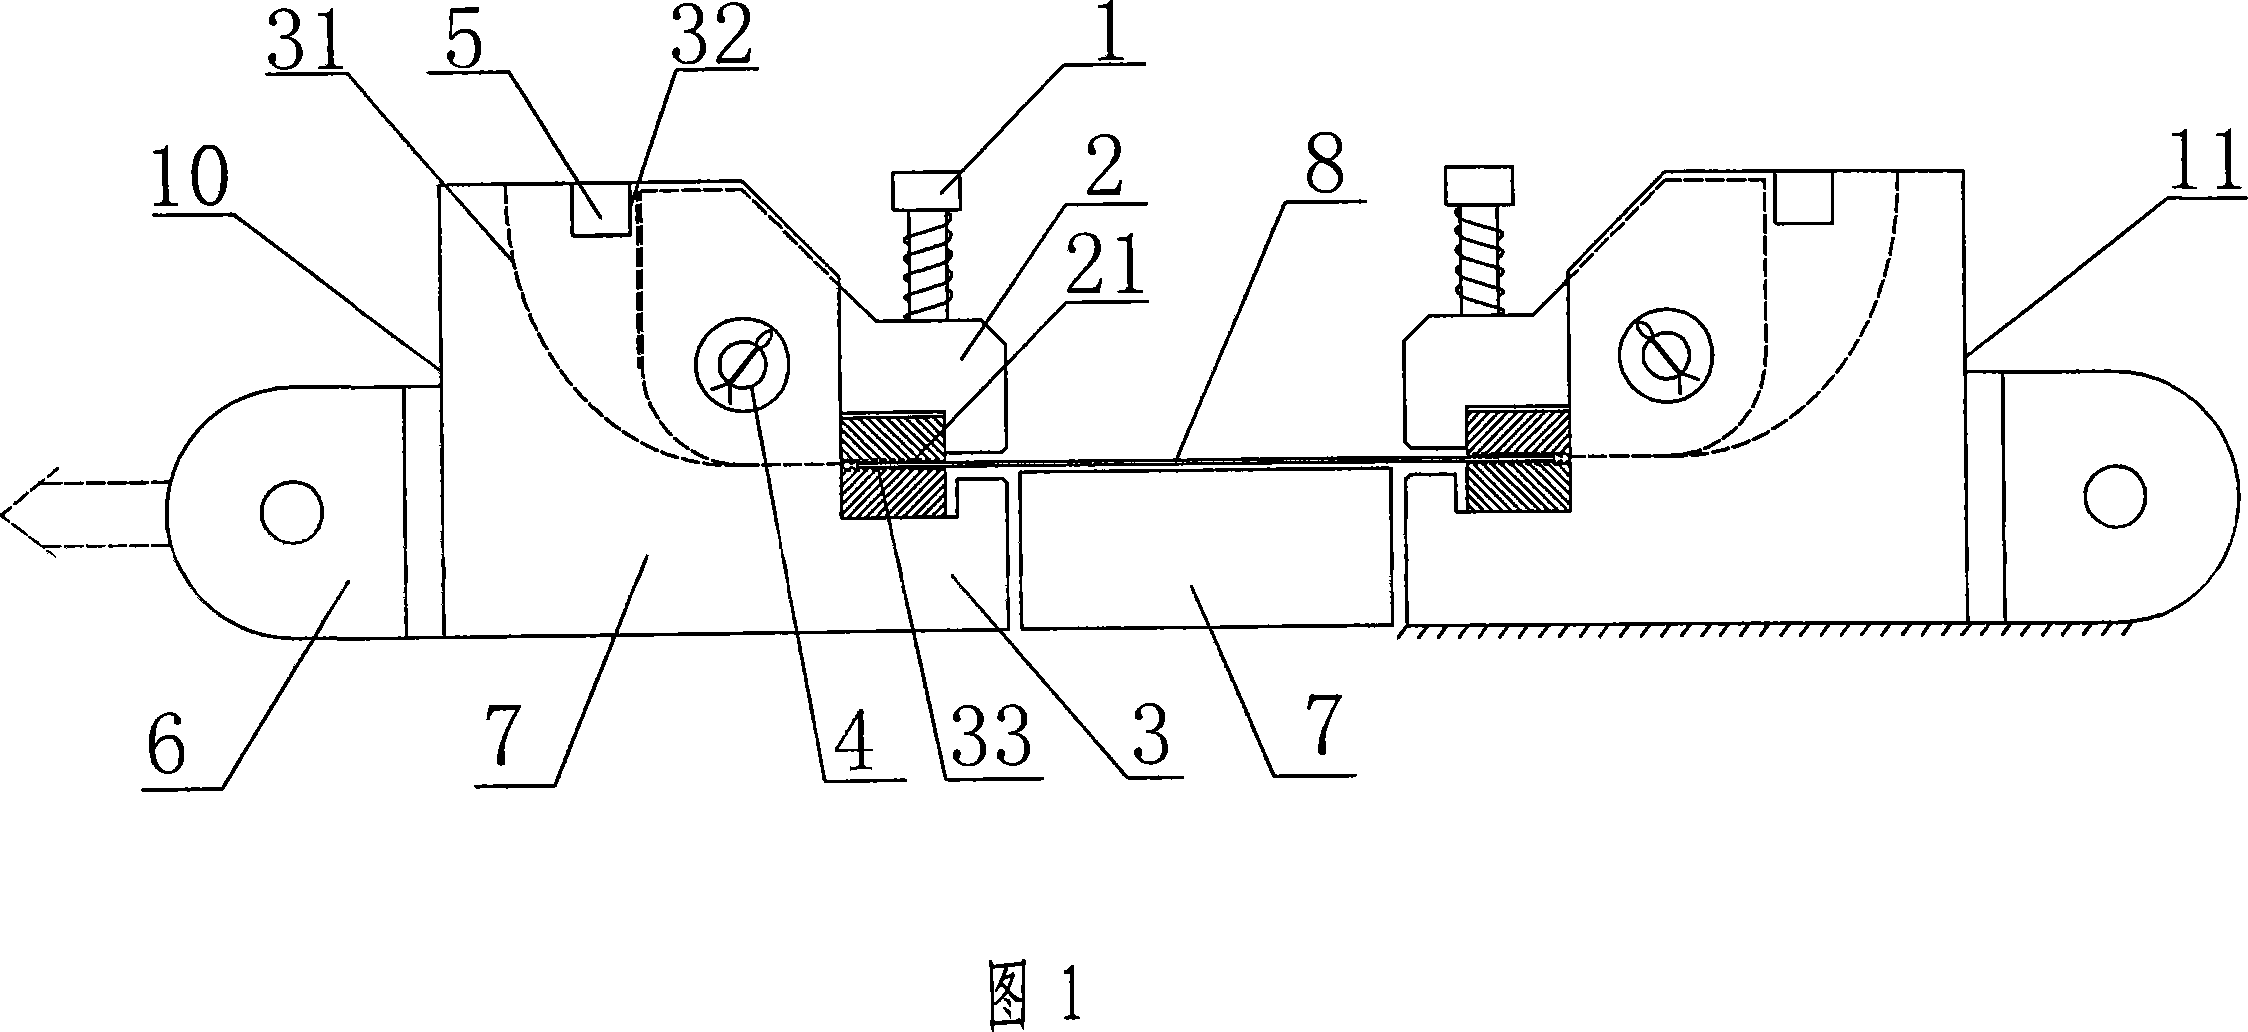 Expansion pulling device for steel framed side wallboard of carriage